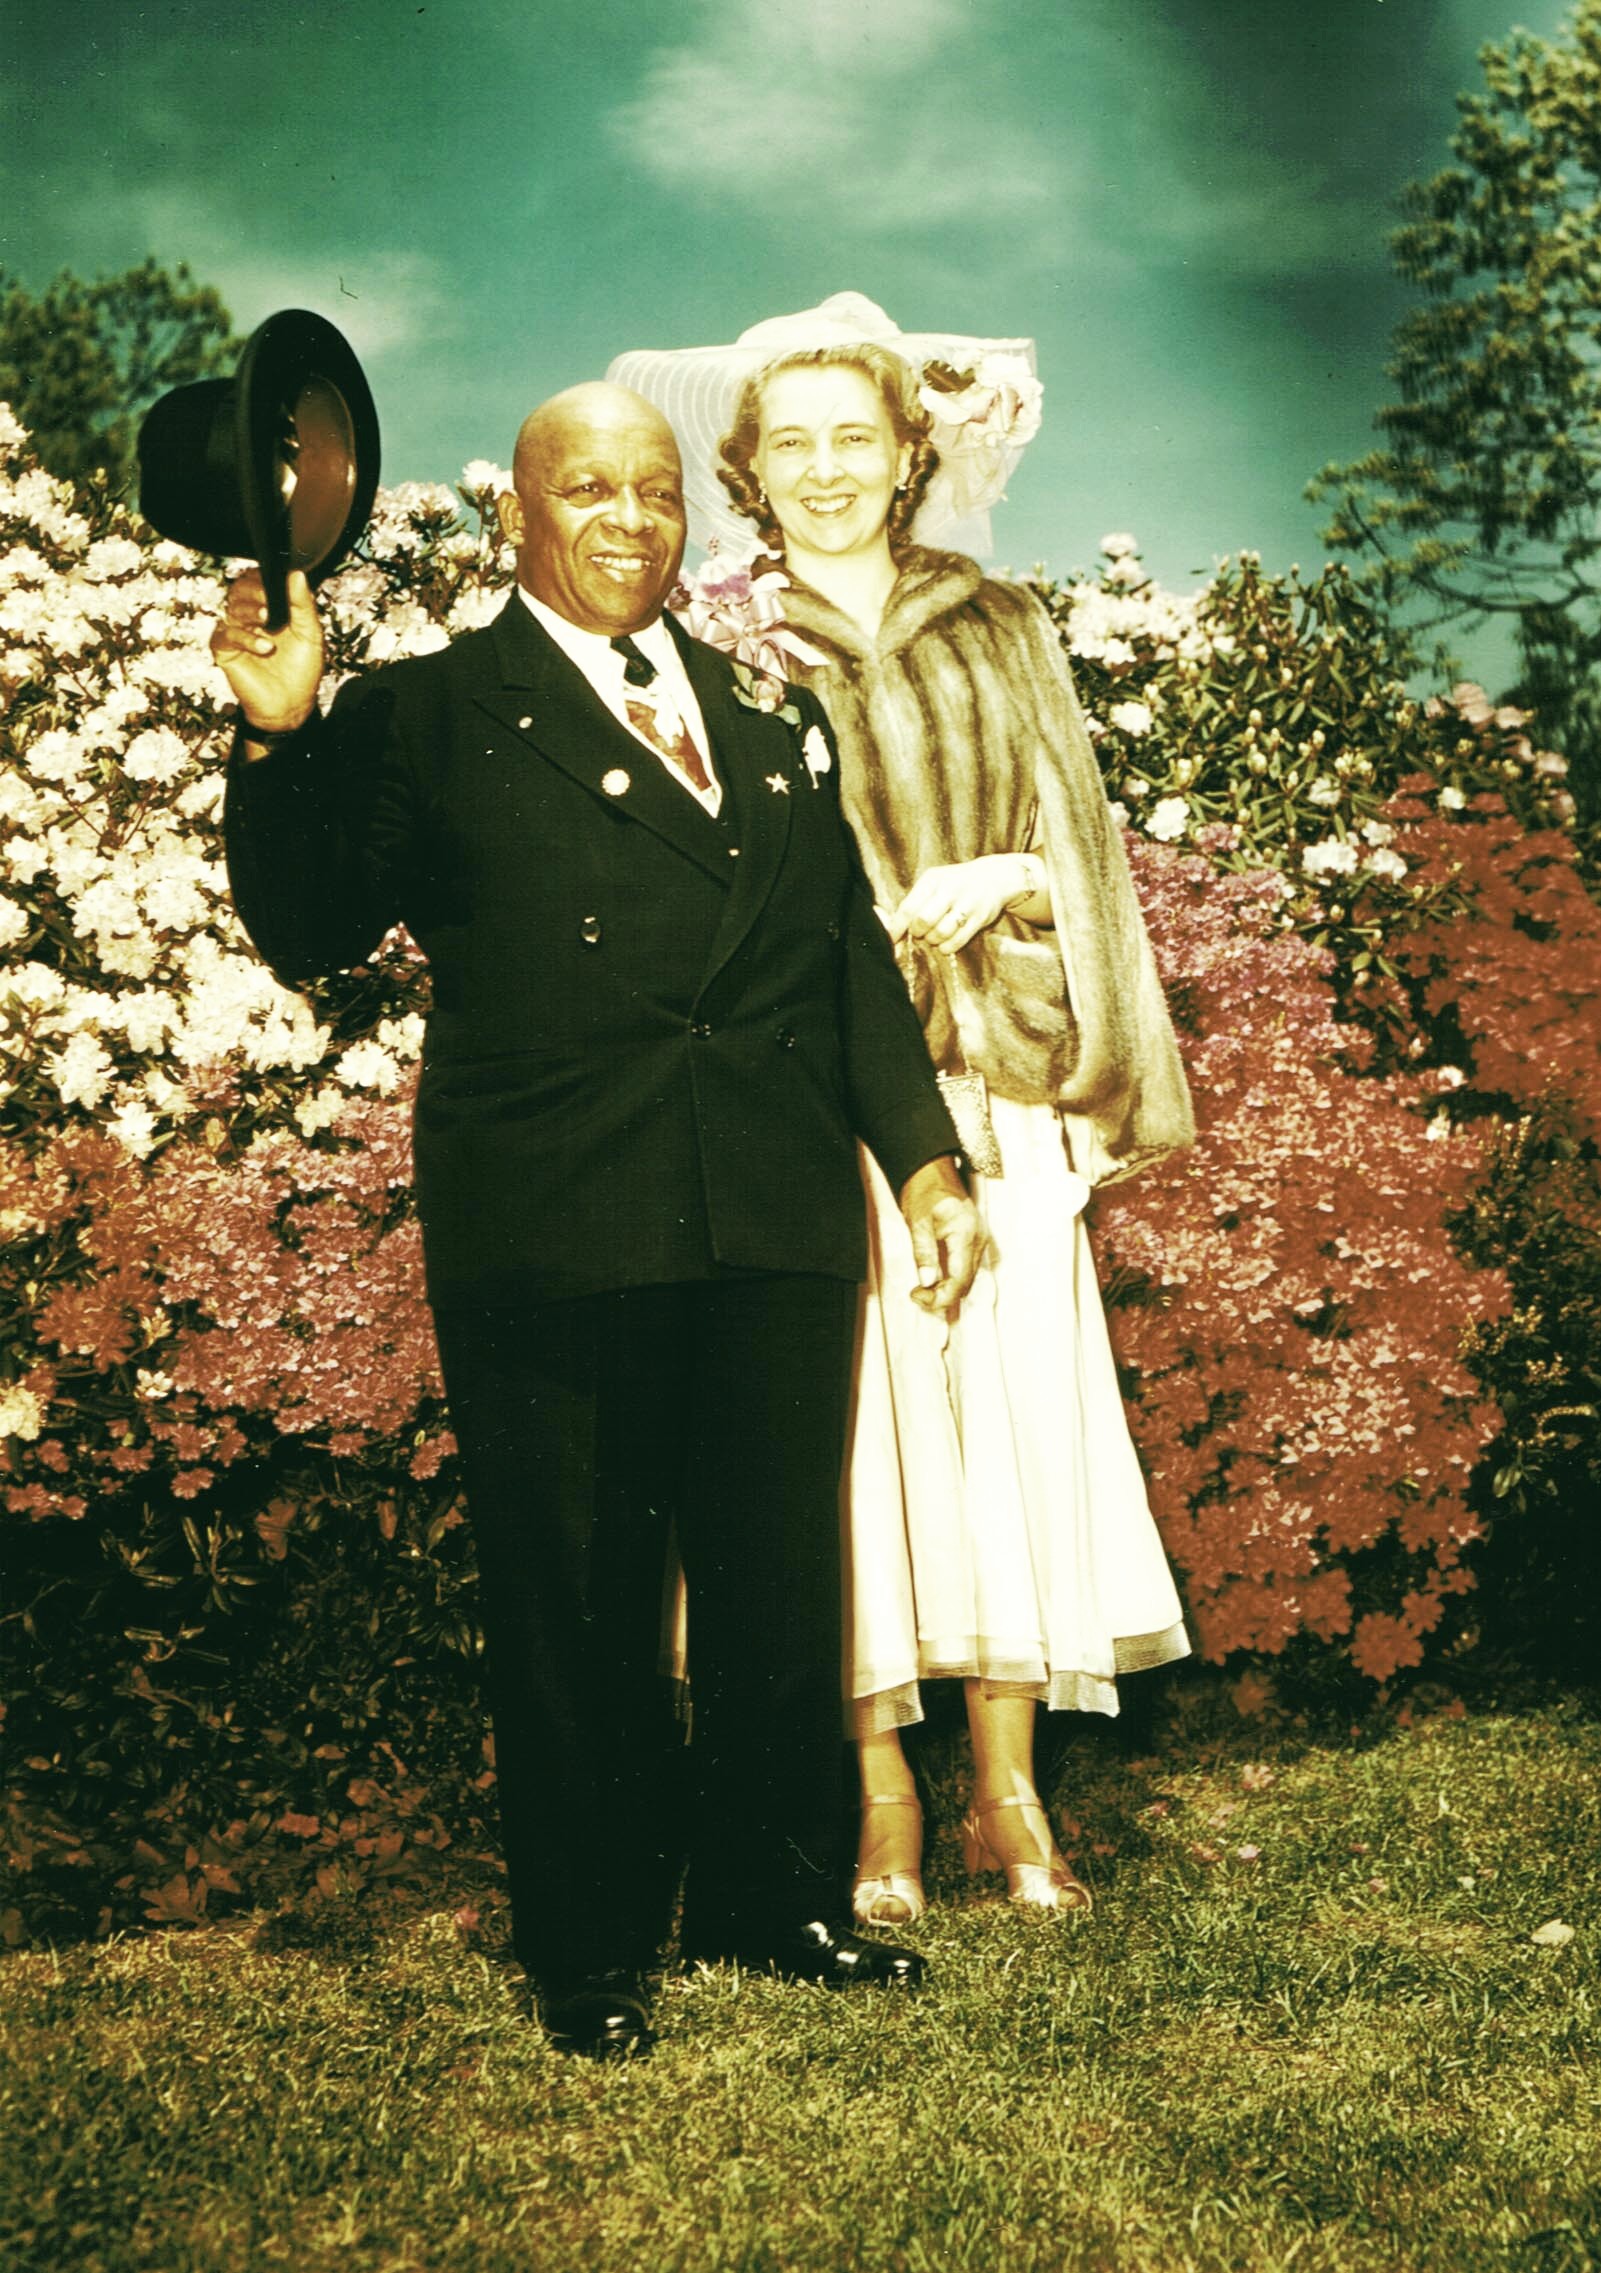 FATHER and MOTHER DIVINE in the Tarytown Garden.